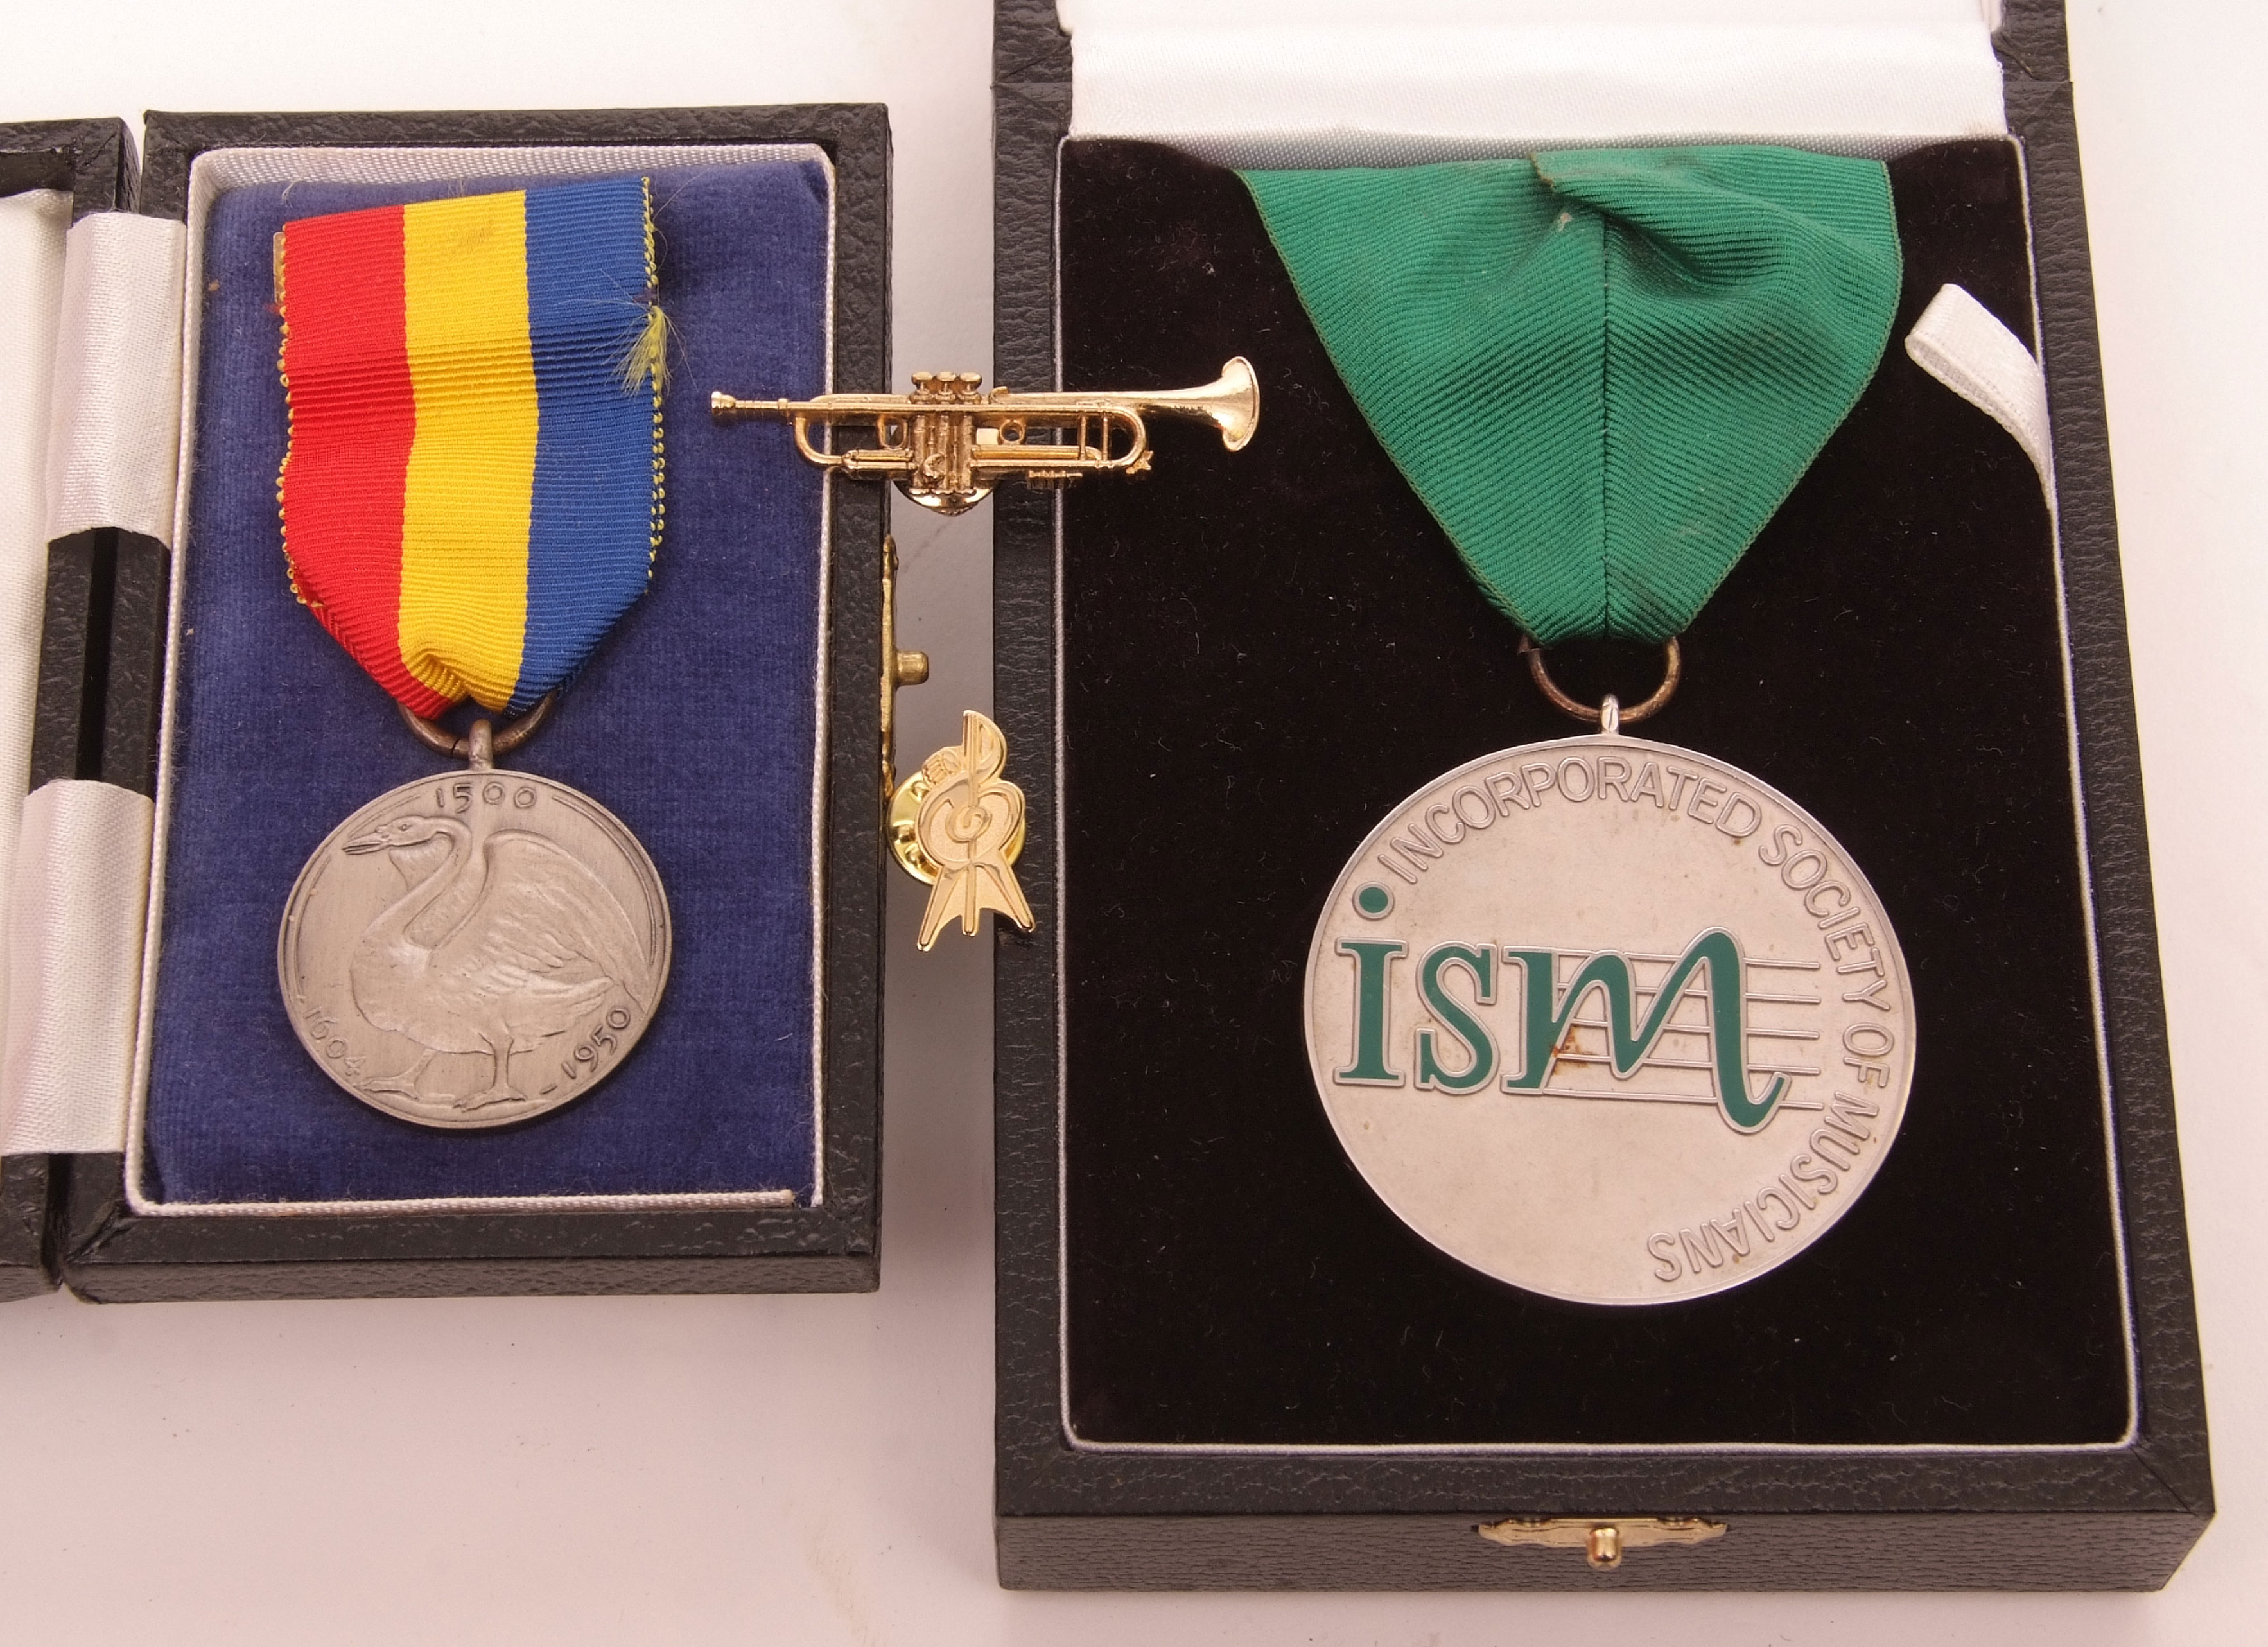 Cased hallmarked Silver presentation medal with ribbon Incorporated Society of Musicians presented